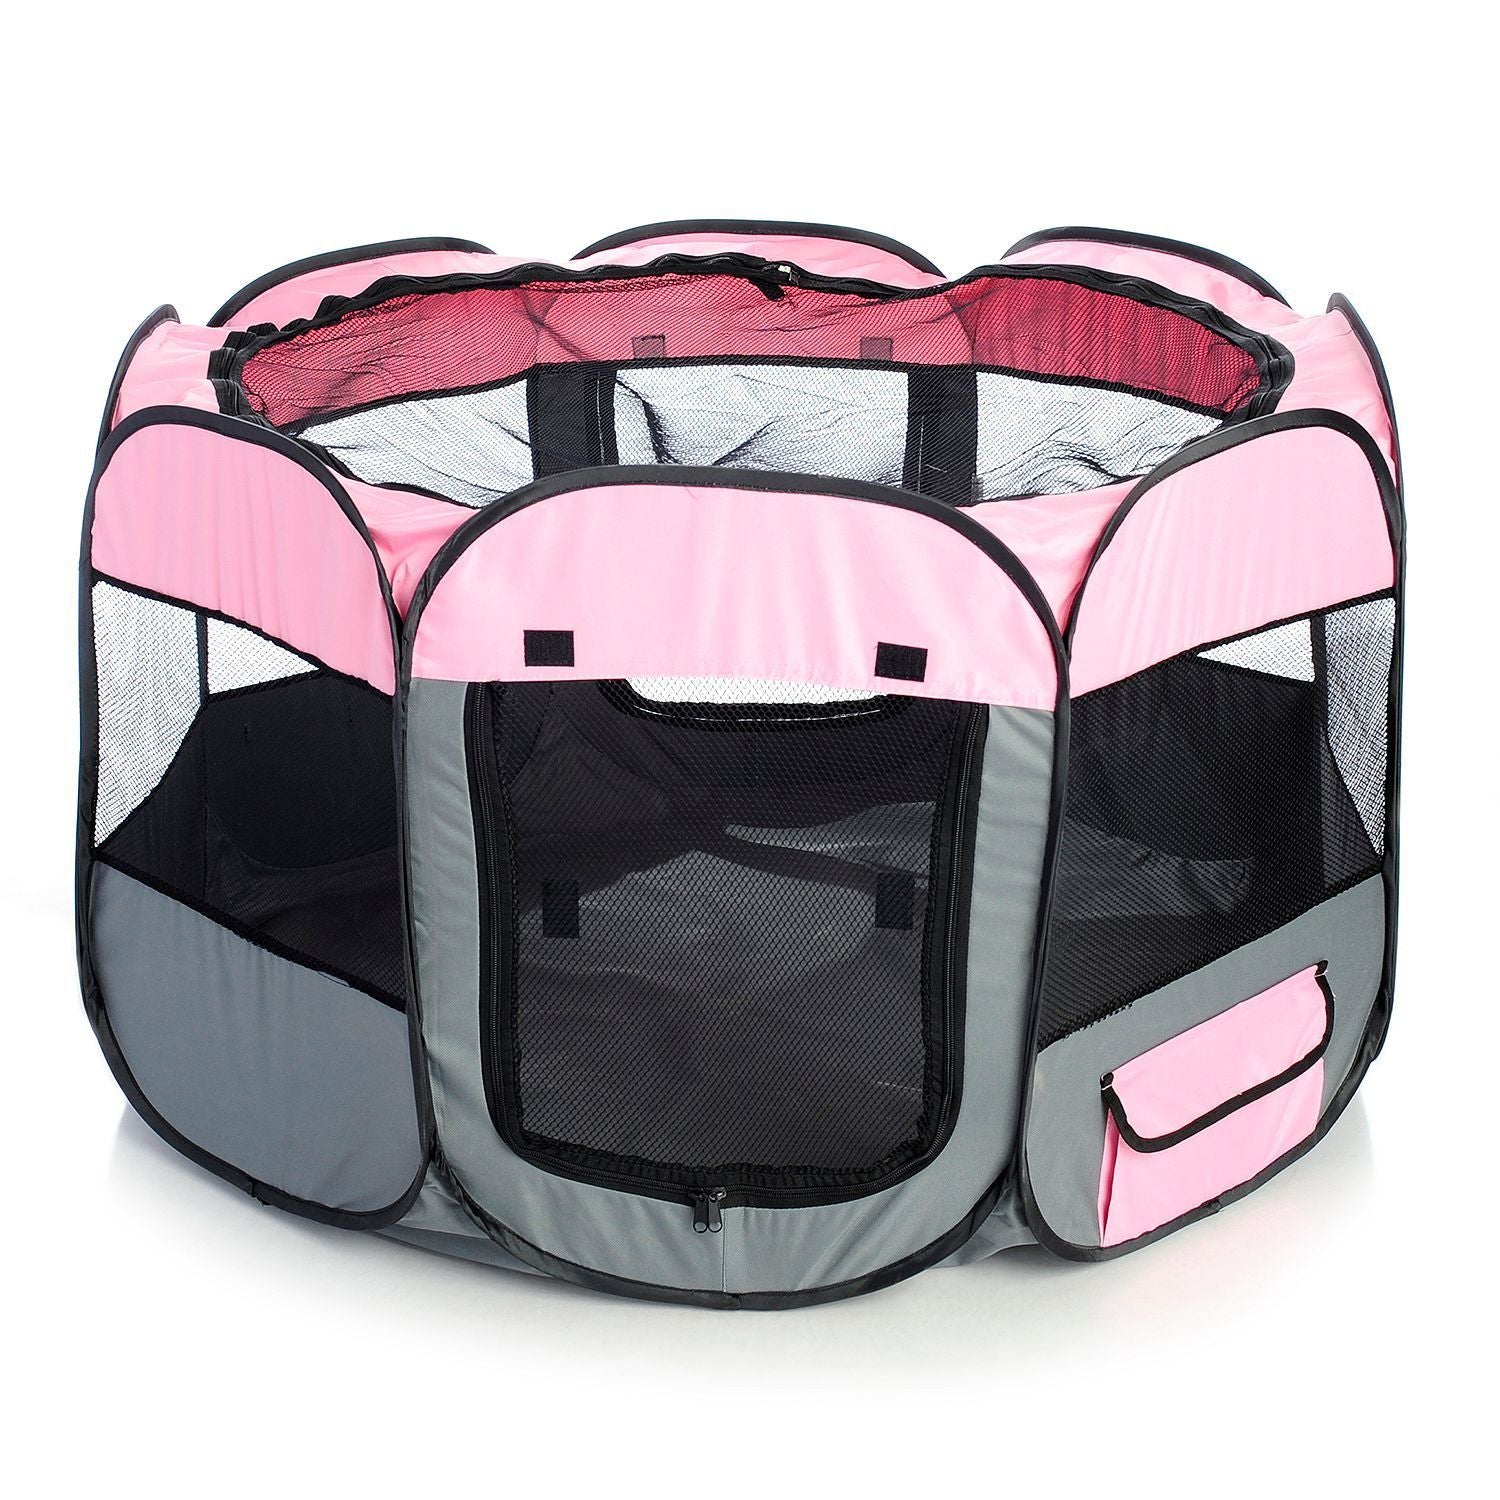 Pet Life ® 'All-Terrain' Lightweight Easy Folding Wire-Framed Collapsible Travel Pet Dog Playpen crate Medium Pink And Grey